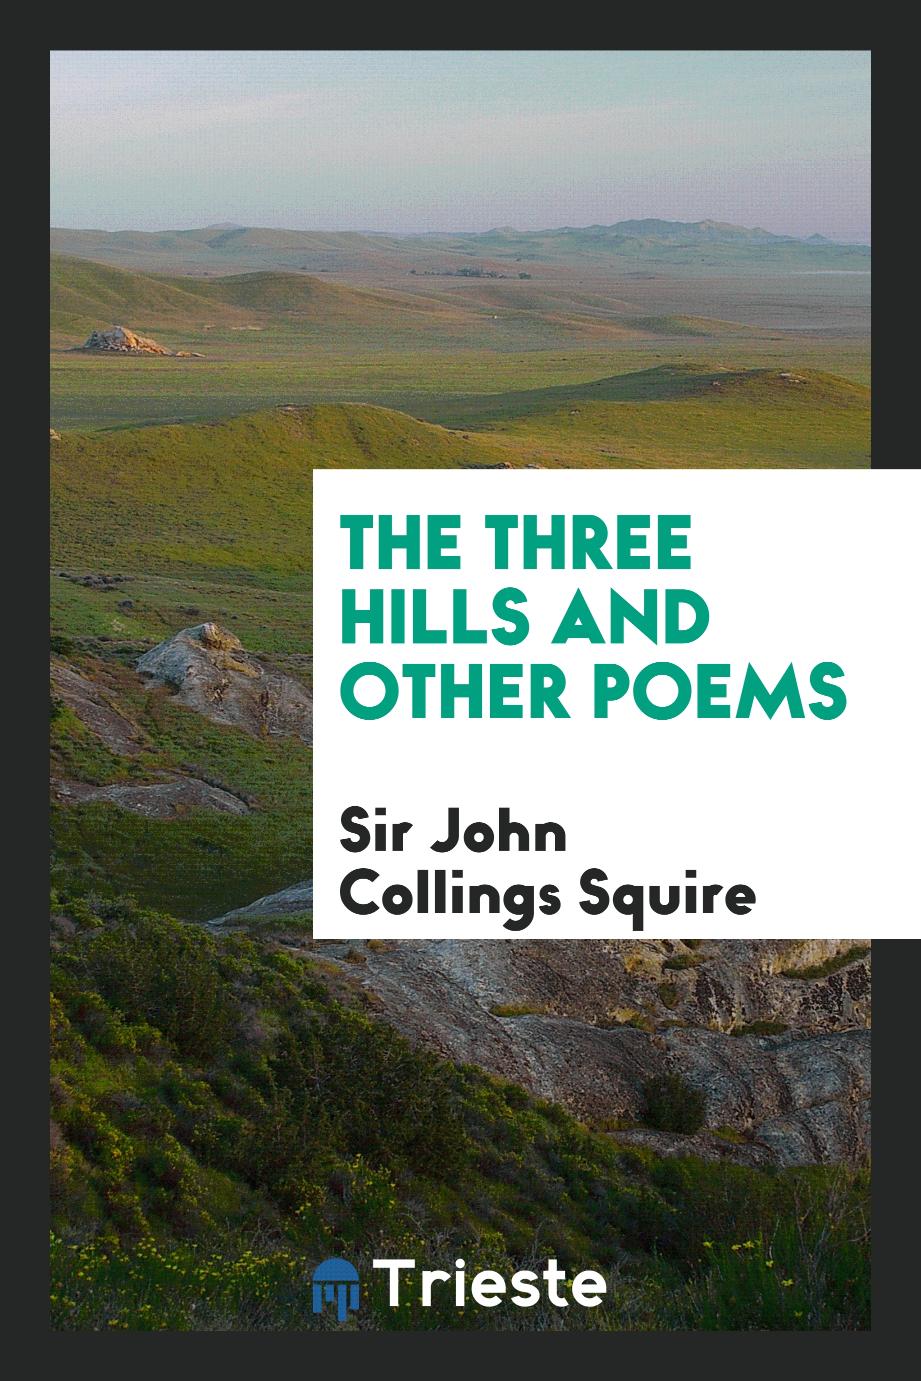 The three hills and other poems